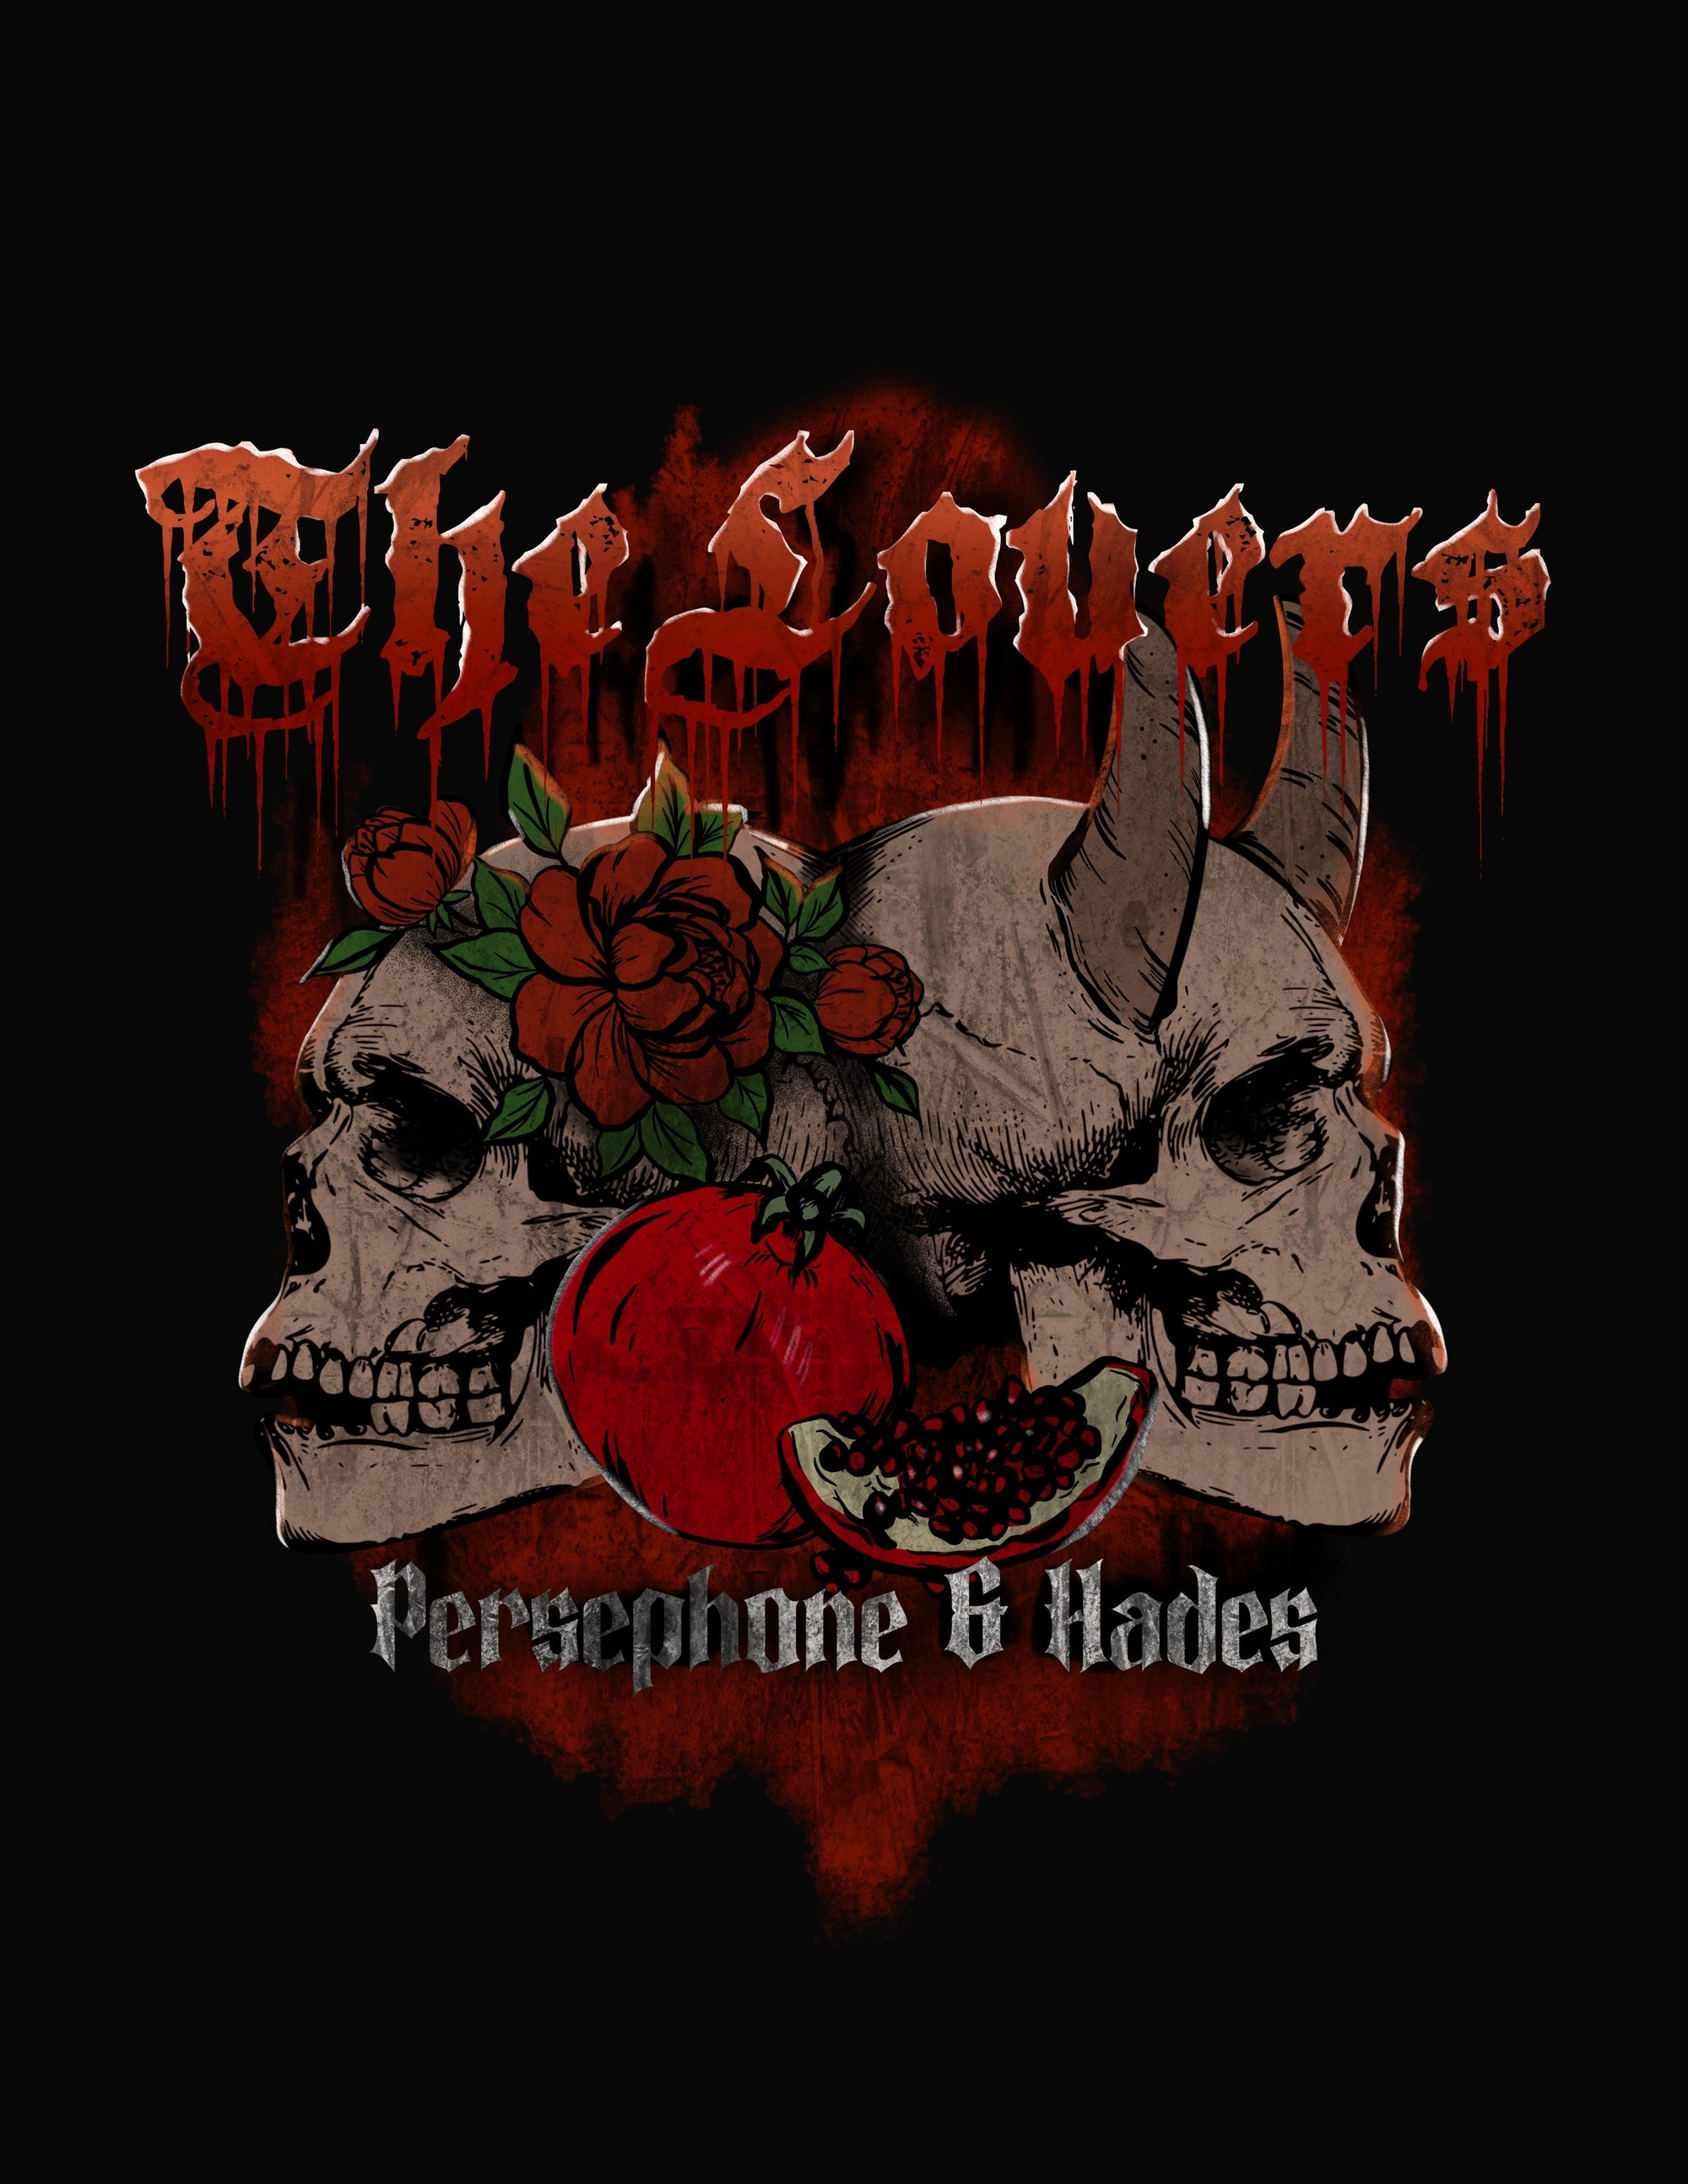 The Lovers Band Tee Persephone and Hades